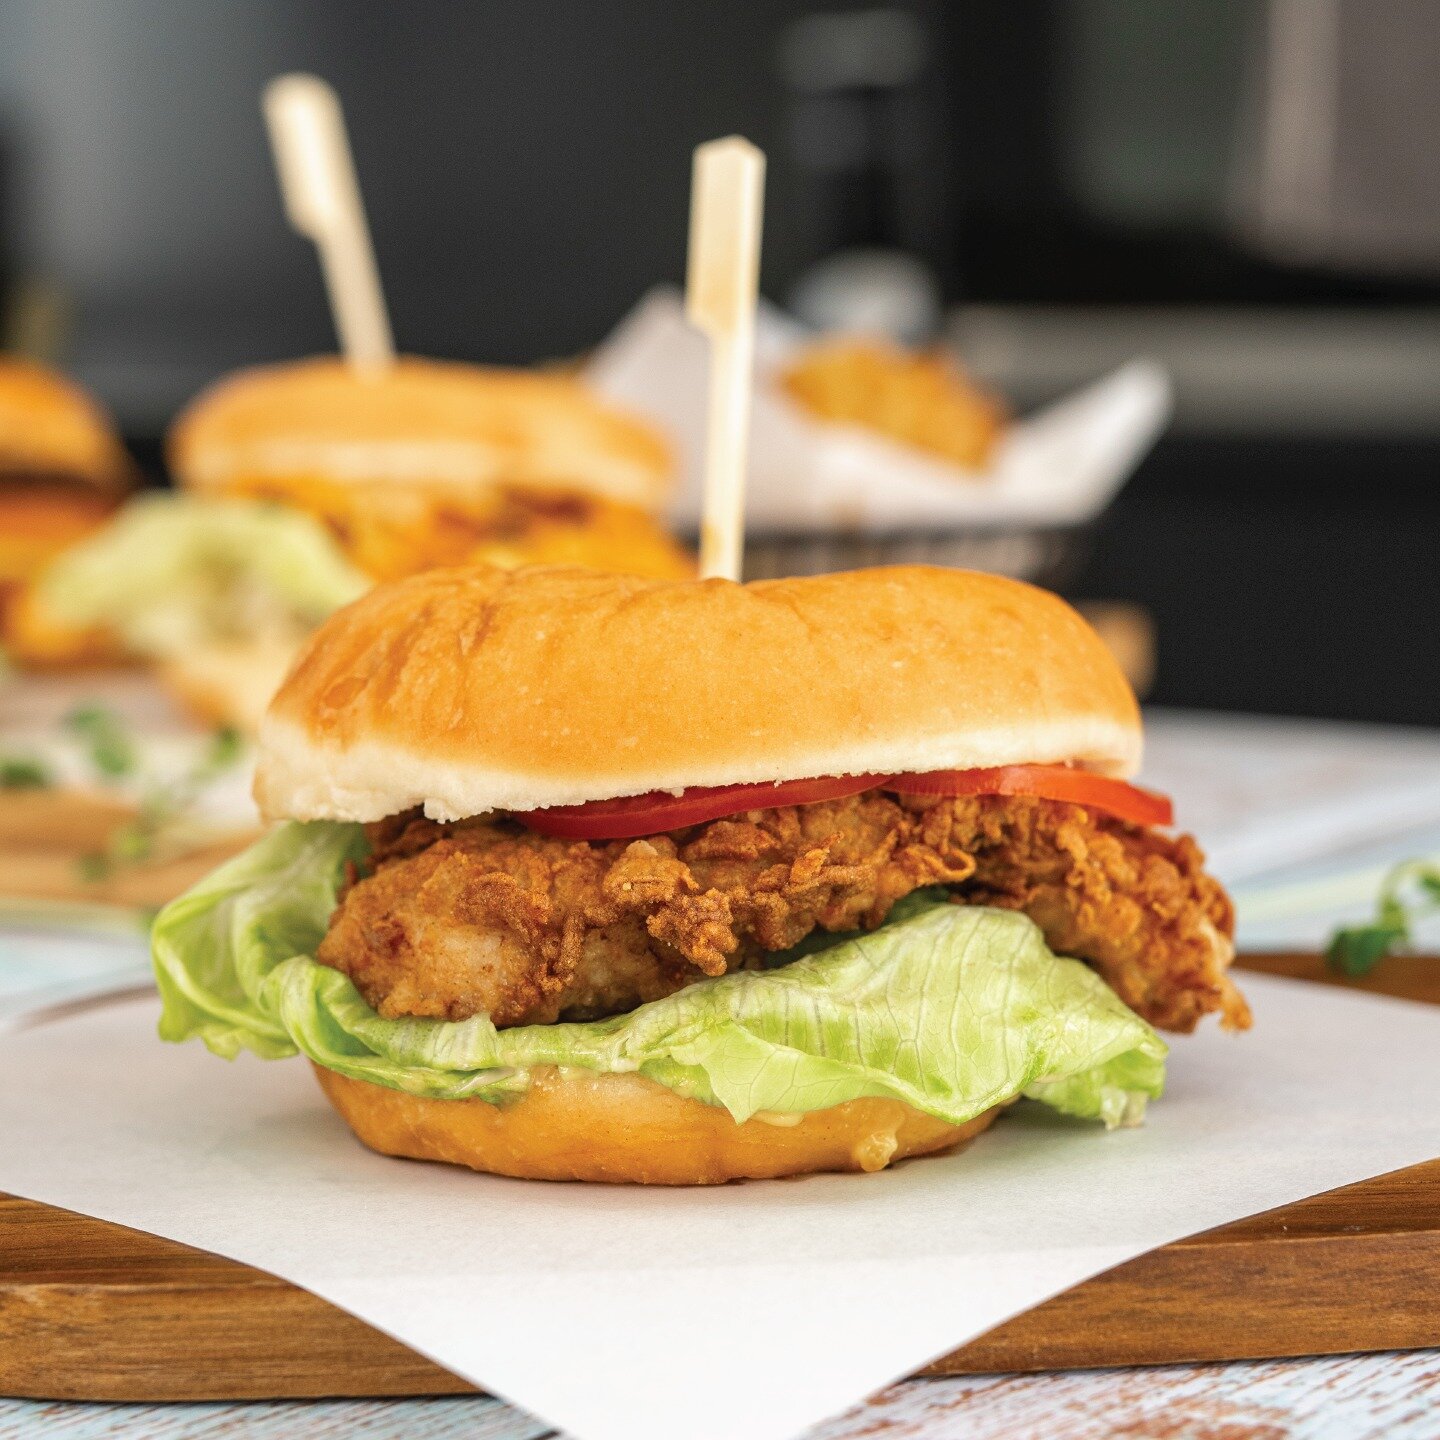 Let us introduce you to a burger that's close to our hearts - the Motha Clucka! 🤤 This one's a family favourite, featuring crispy, lightly spiced fried chicken to perfection, cradled in our famous warm, soft bun, with a selection of tasty sauces. An